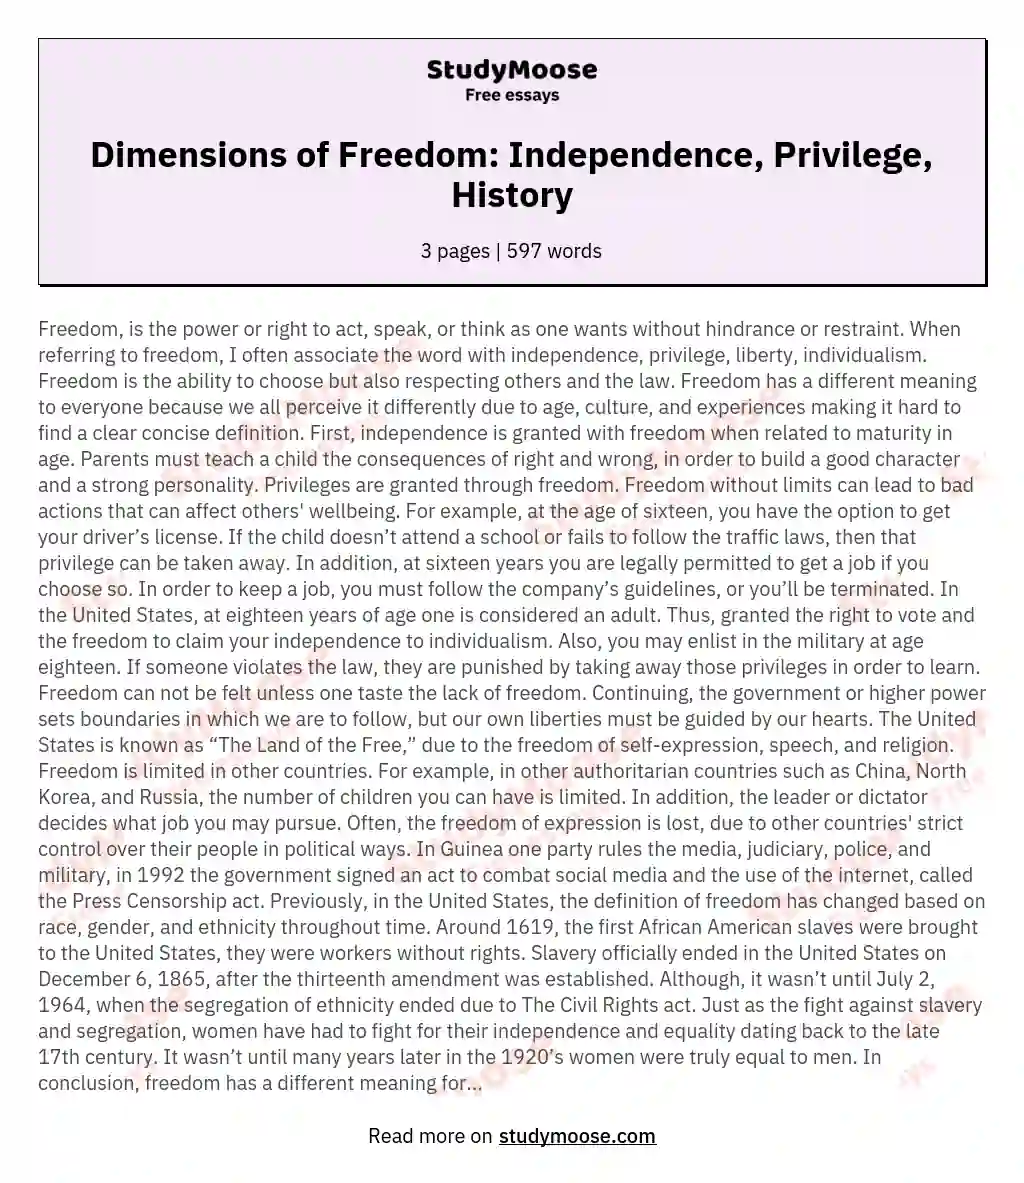 what is the meaning of freedom essay